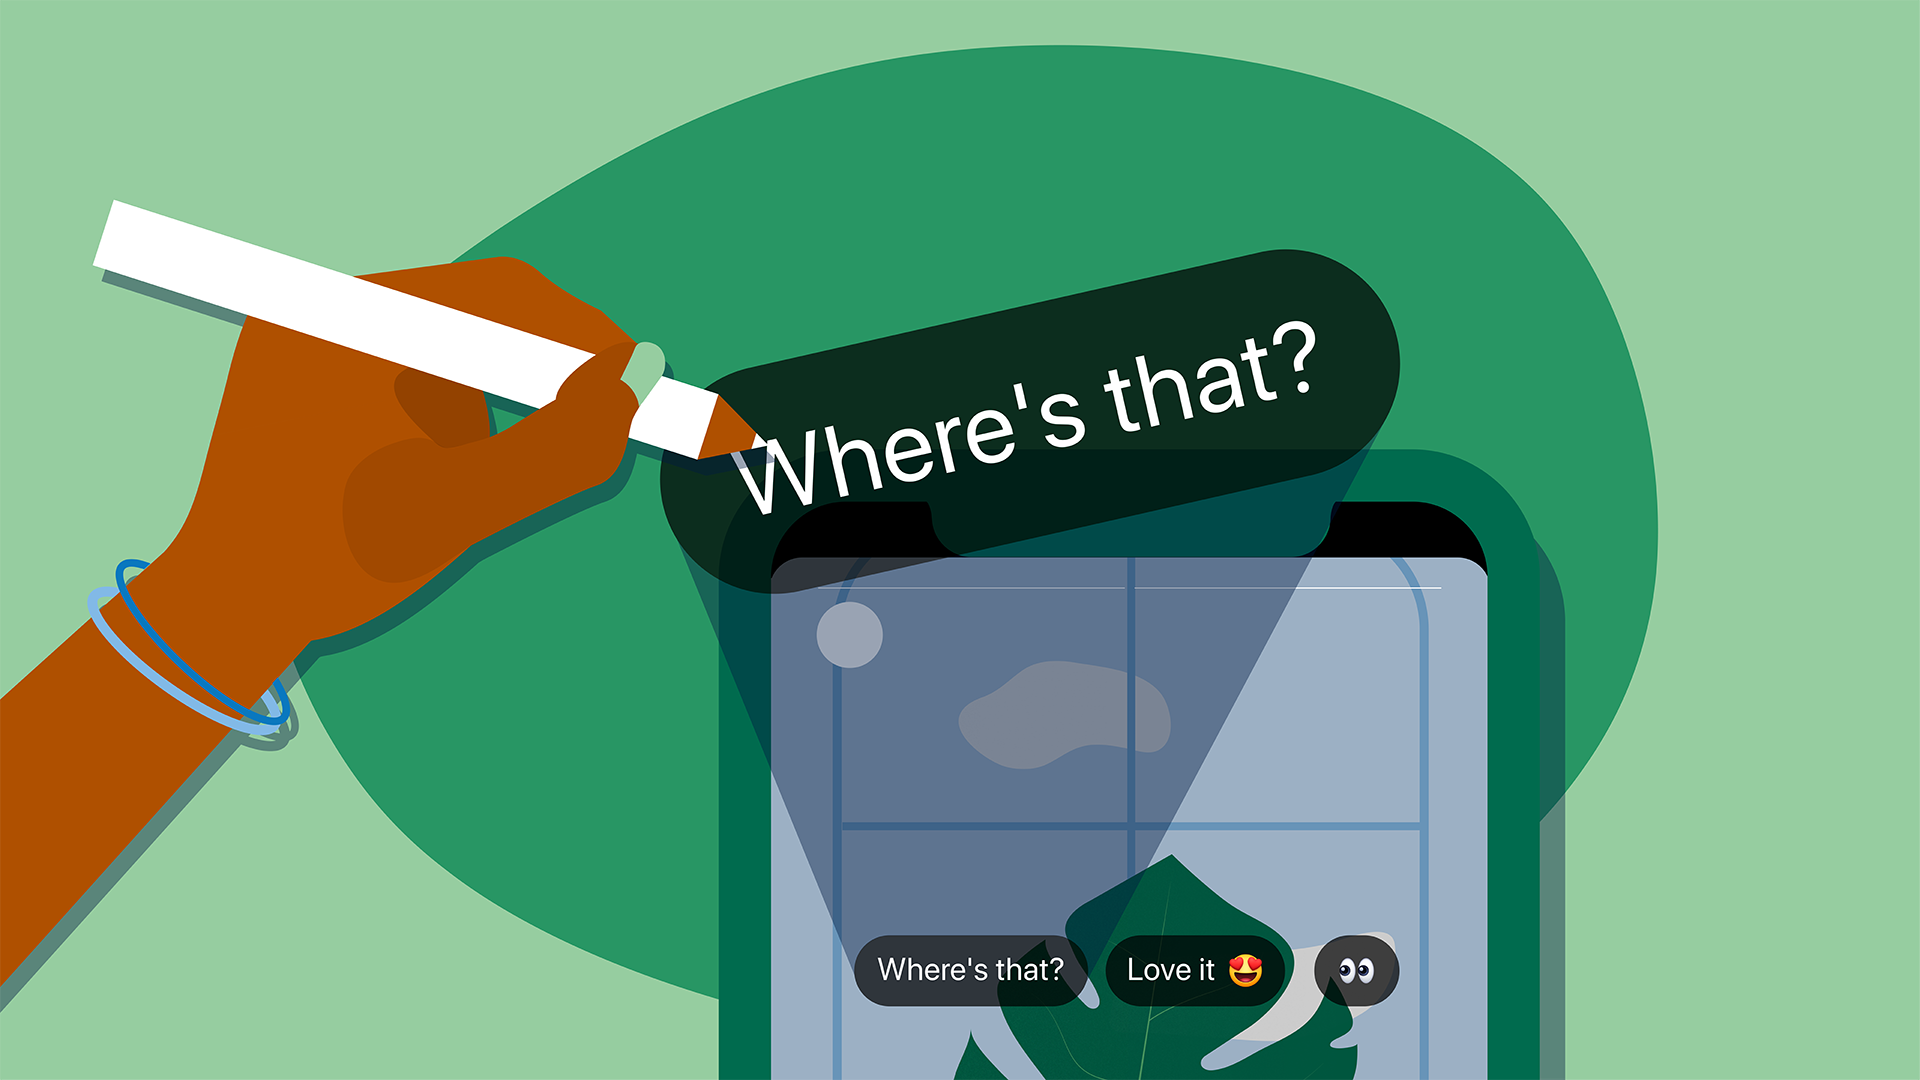 A content designer’s hand pens the app-suggested phrase Where’s that?